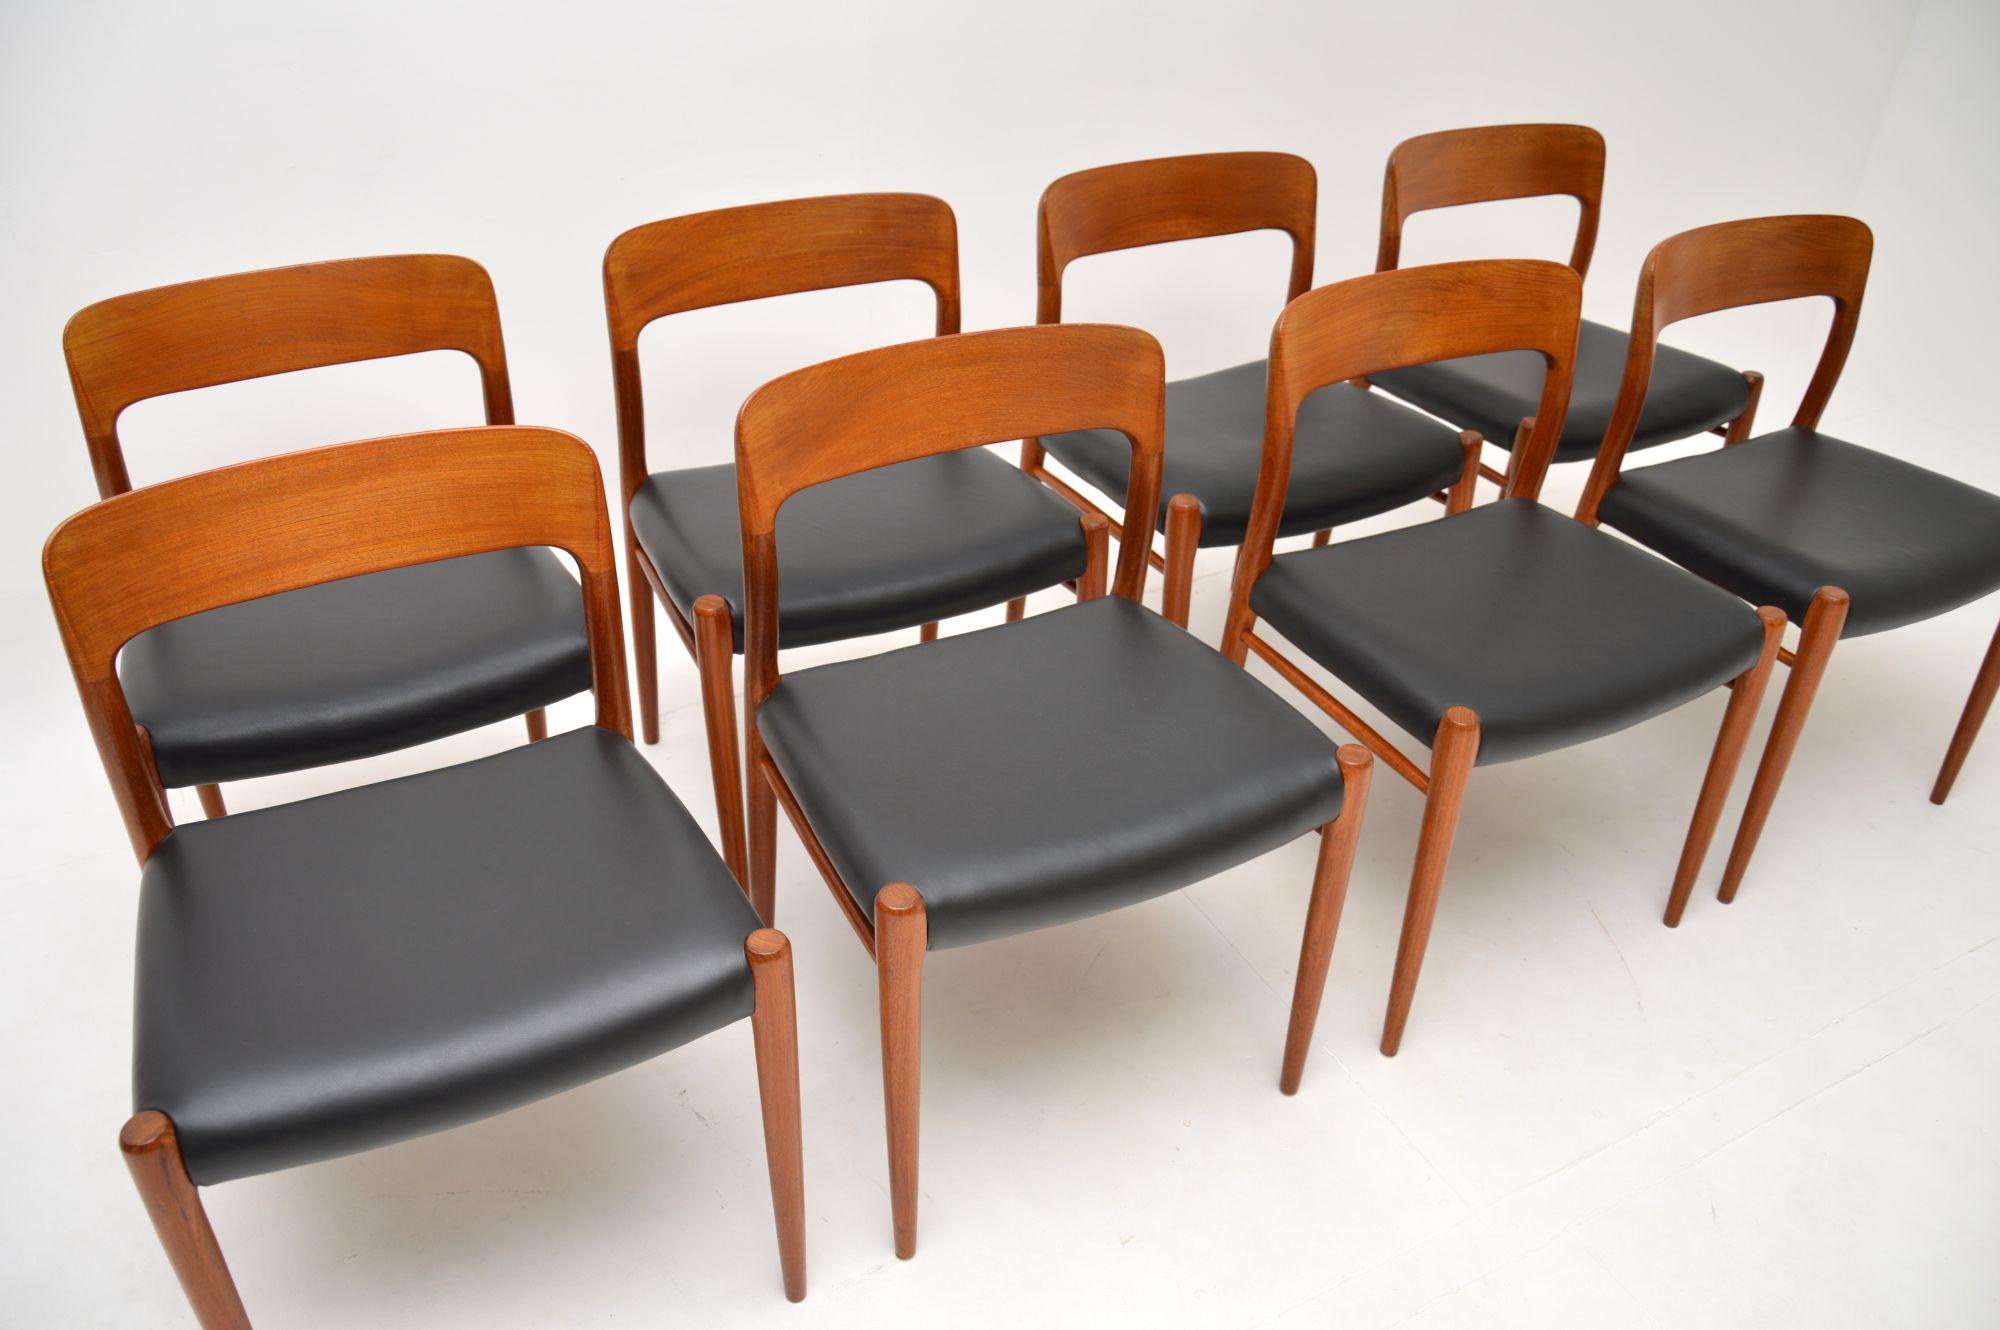 Mid-Century Modern Set of 8 Teak and Leather Model 75 Dining Chairs by Niels Moller